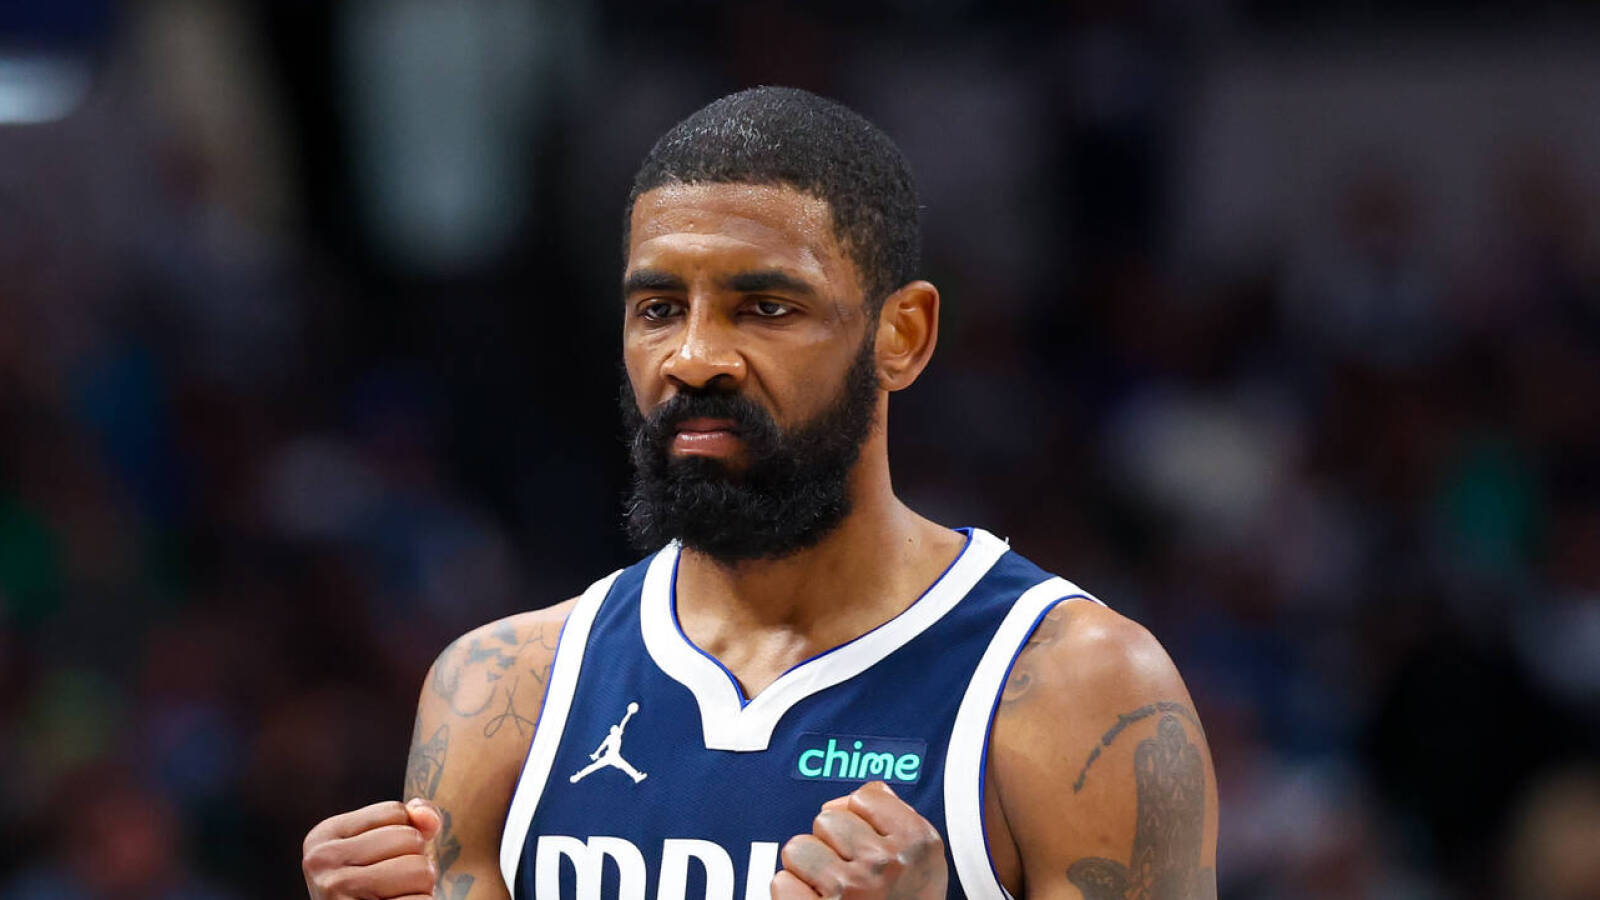 NBA world reacts to Kyrie Irving's incredible buzzer-beater